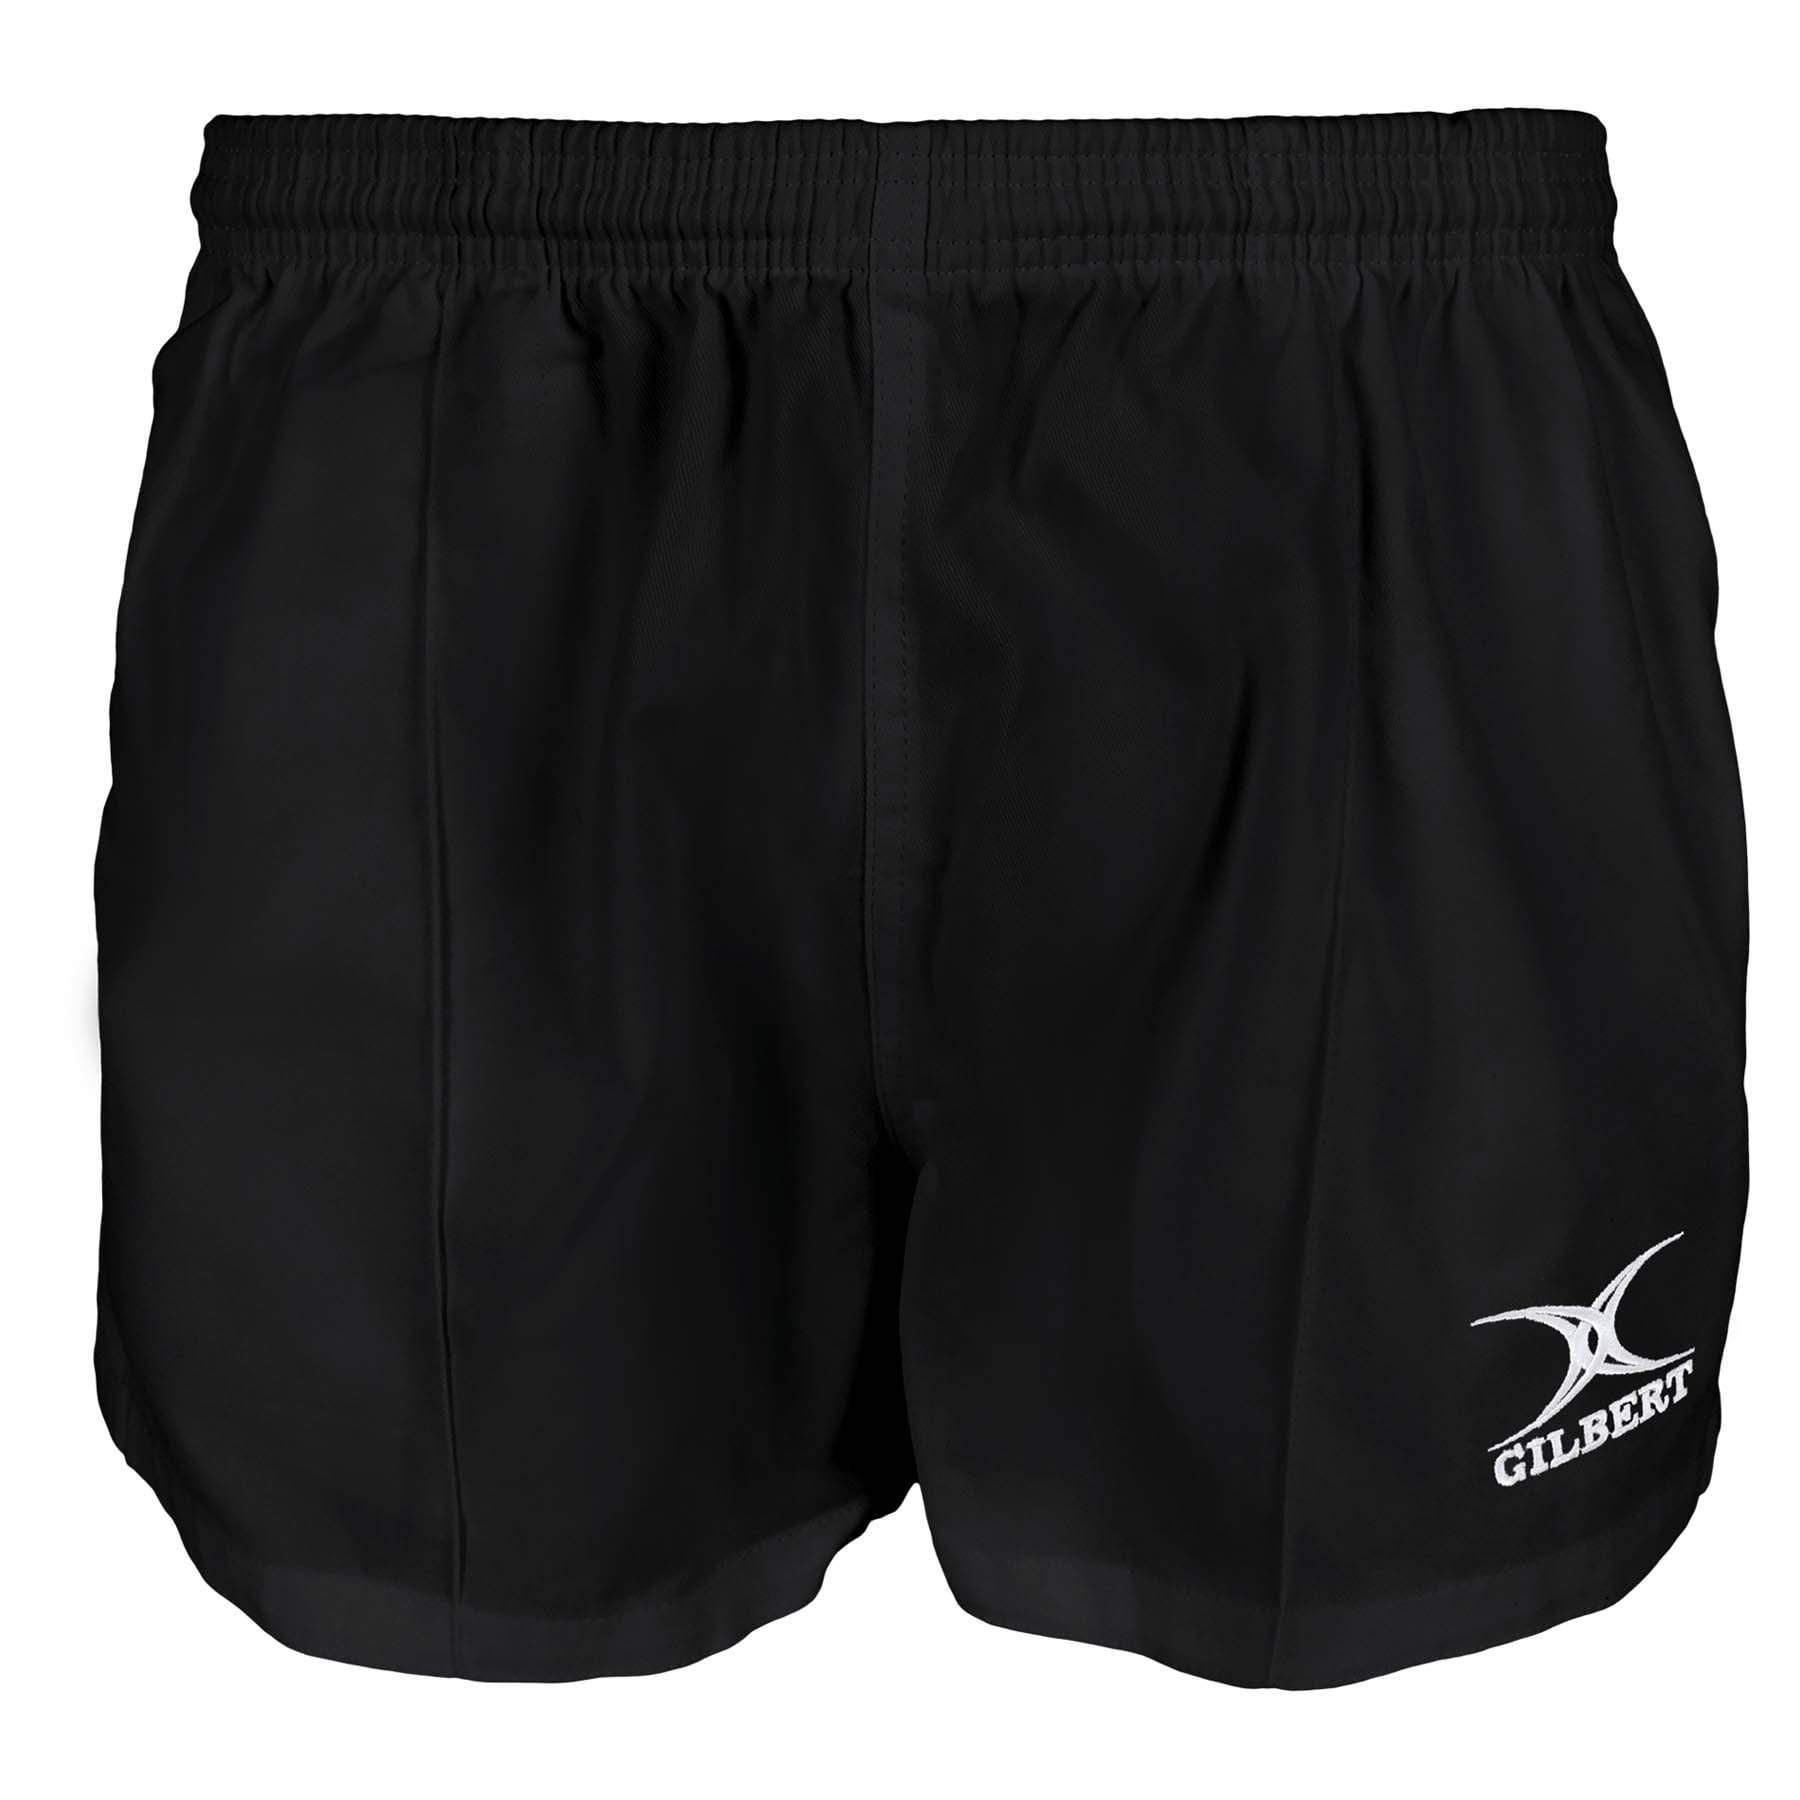 Rugby Imports Gilbert Kiwi Pro Rugby Short - Black